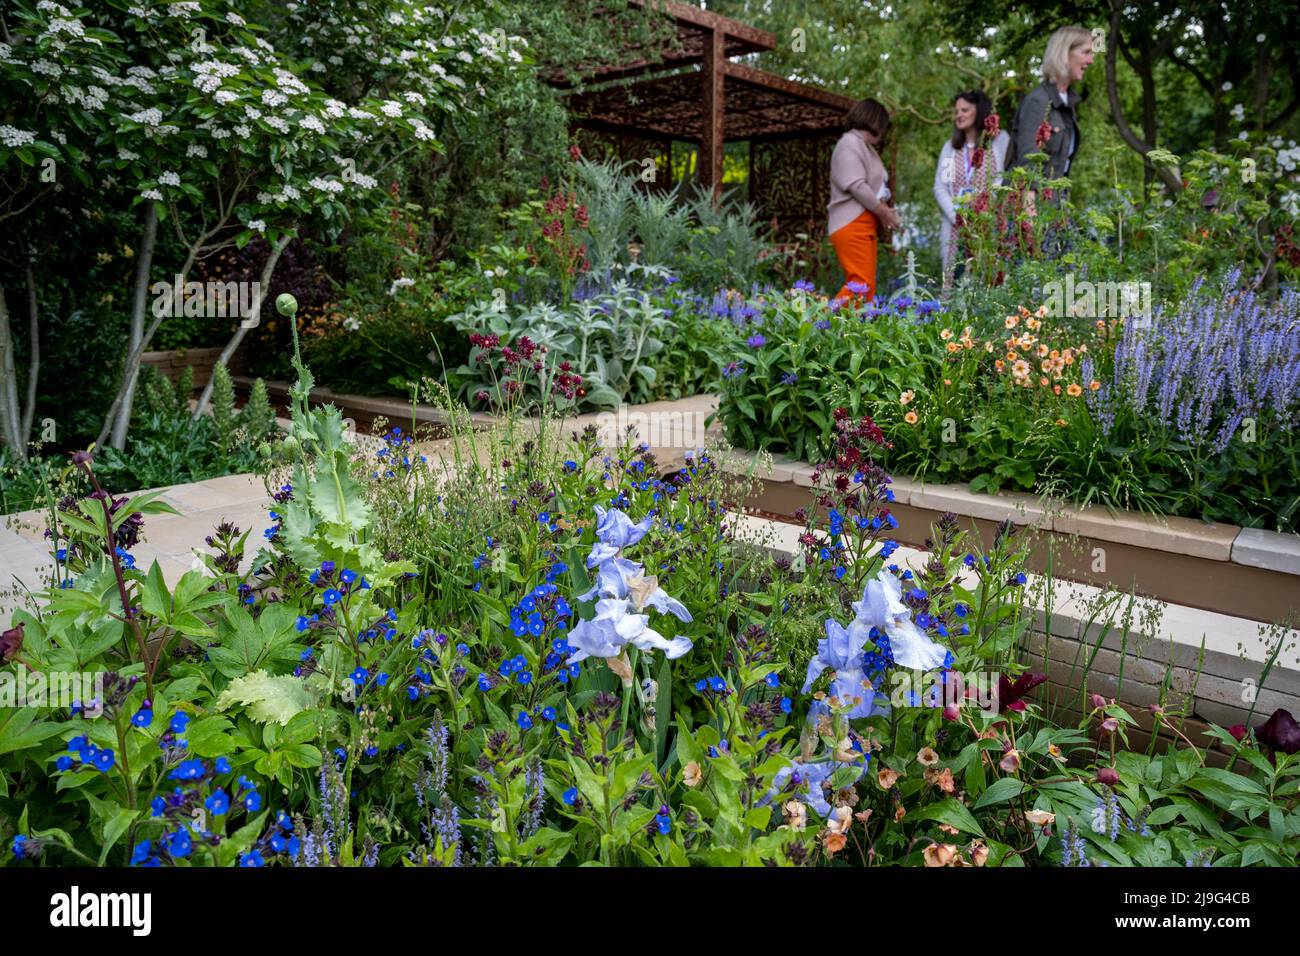 London, UK.  23 May 2022. Visitors at the Morris & Co. garden at the press day of the RHS Chelsea Flower Show in the grounds of the Royal Hospital Chelsea.  The show runs to 28 May 2022.  Credit: Stephen Chung / Alamy Live News Stock Photo